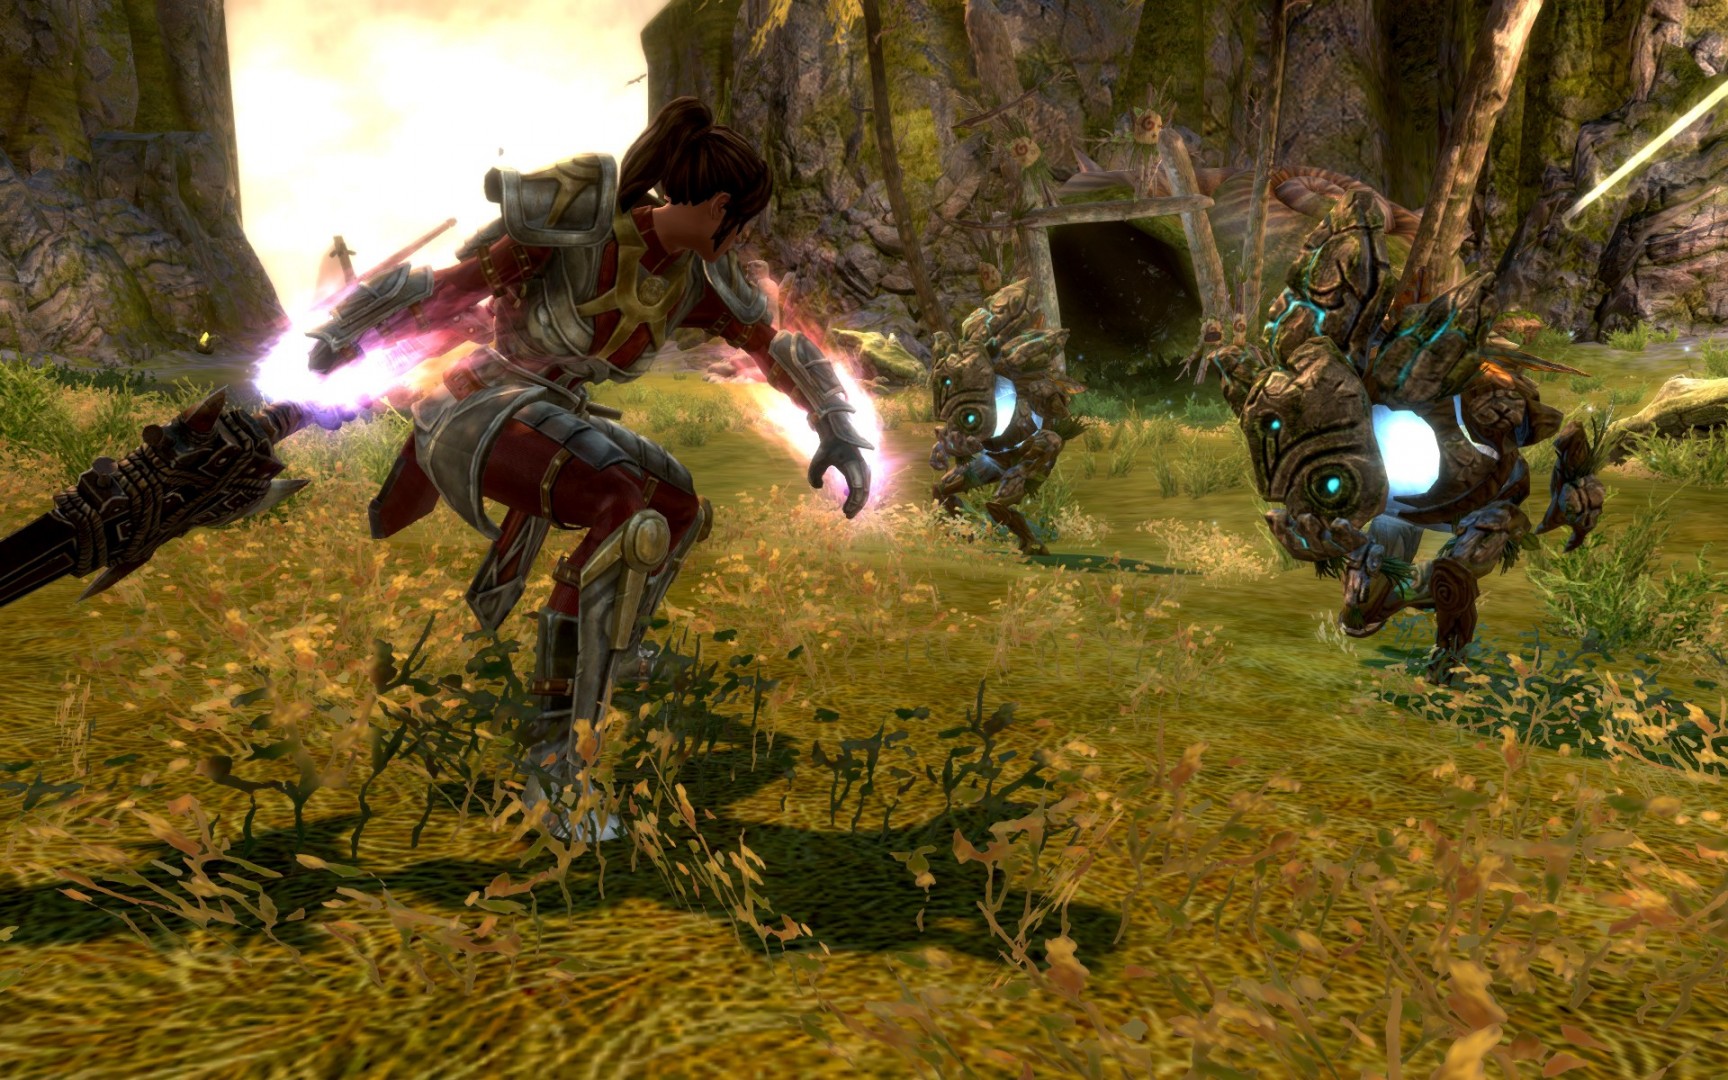 Kingdoms of Amalur: Reckoning - The Legend of Dead Kel DLC Is Out Now